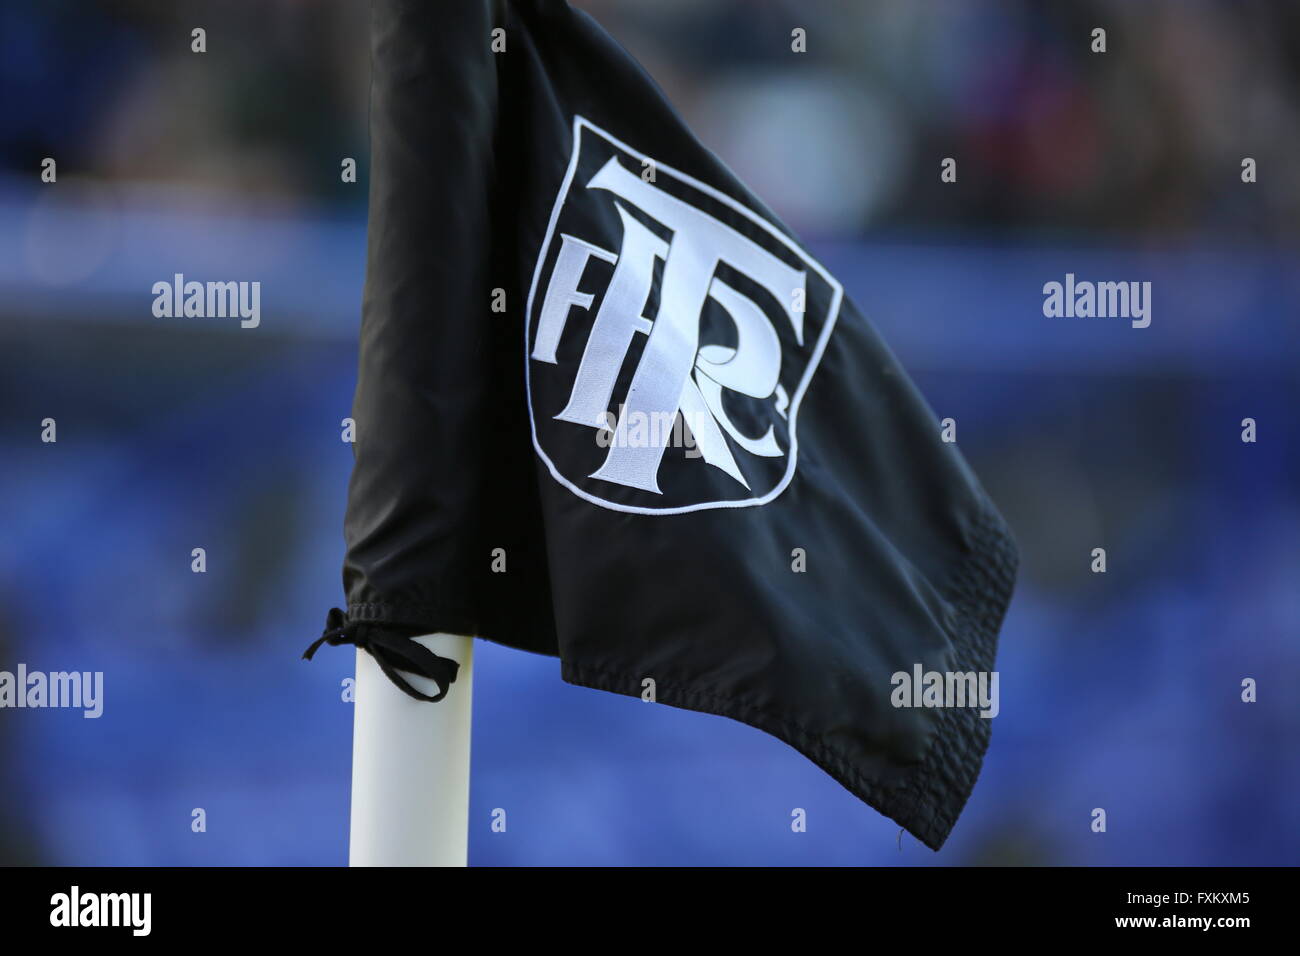 Birkenhead, UK. 16th April, 2016. The corner flag with Tranmere logo during the game between Tranmere Rovers and Wrexham at Prenton Park. Credit:  Simon Newbury/Alamy Live News Stock Photo